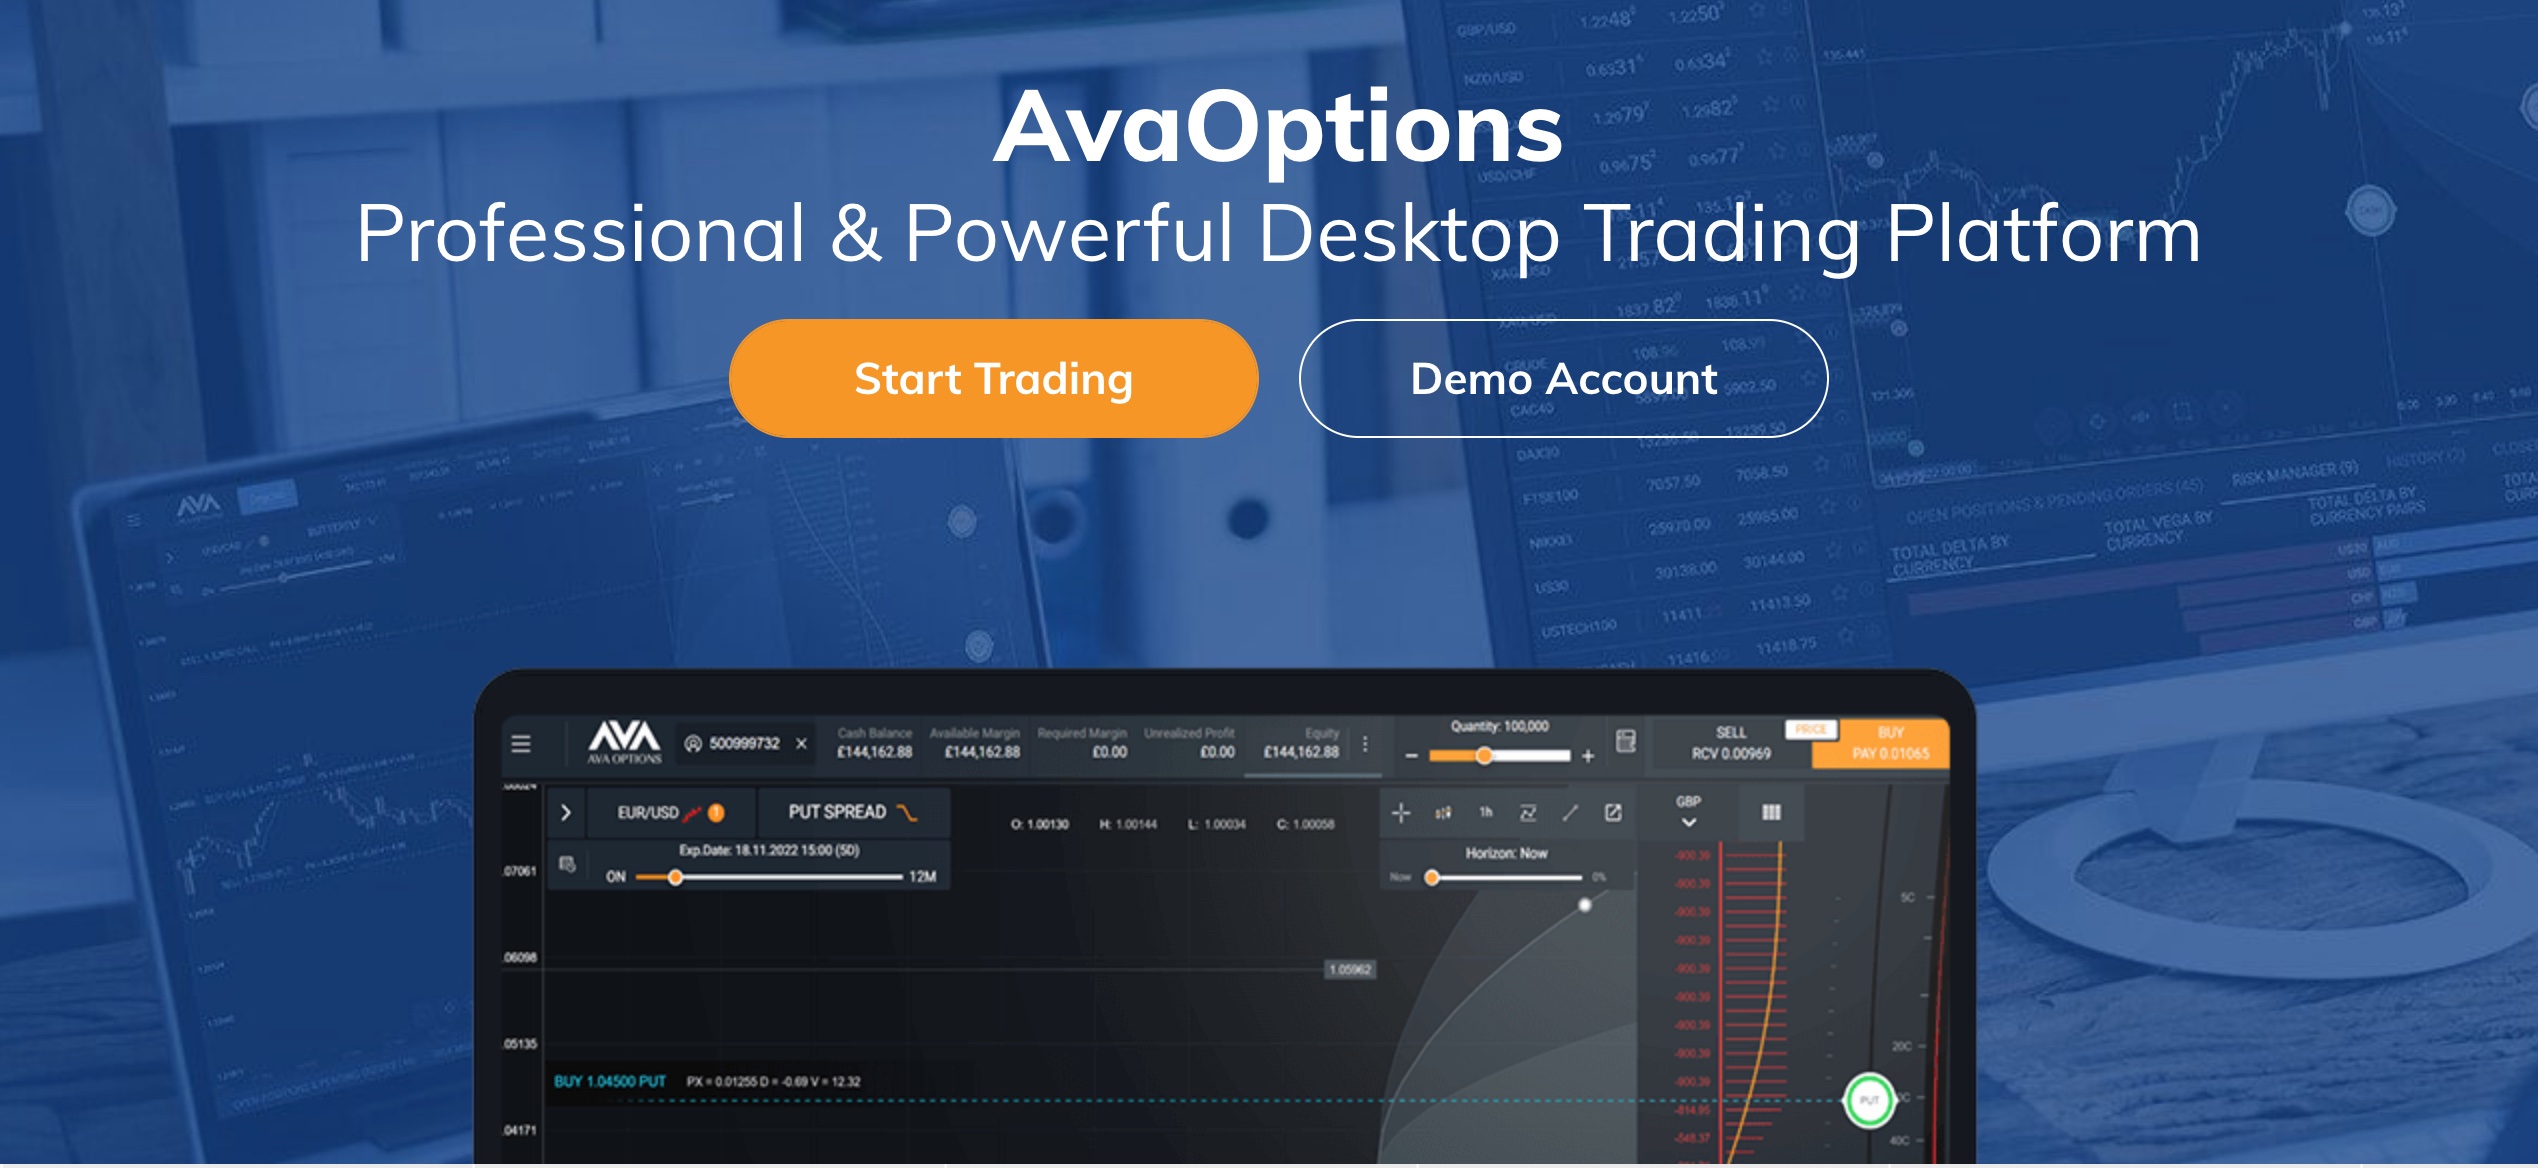 Avaoptions is one of the best binary options trading websites in Nigeria